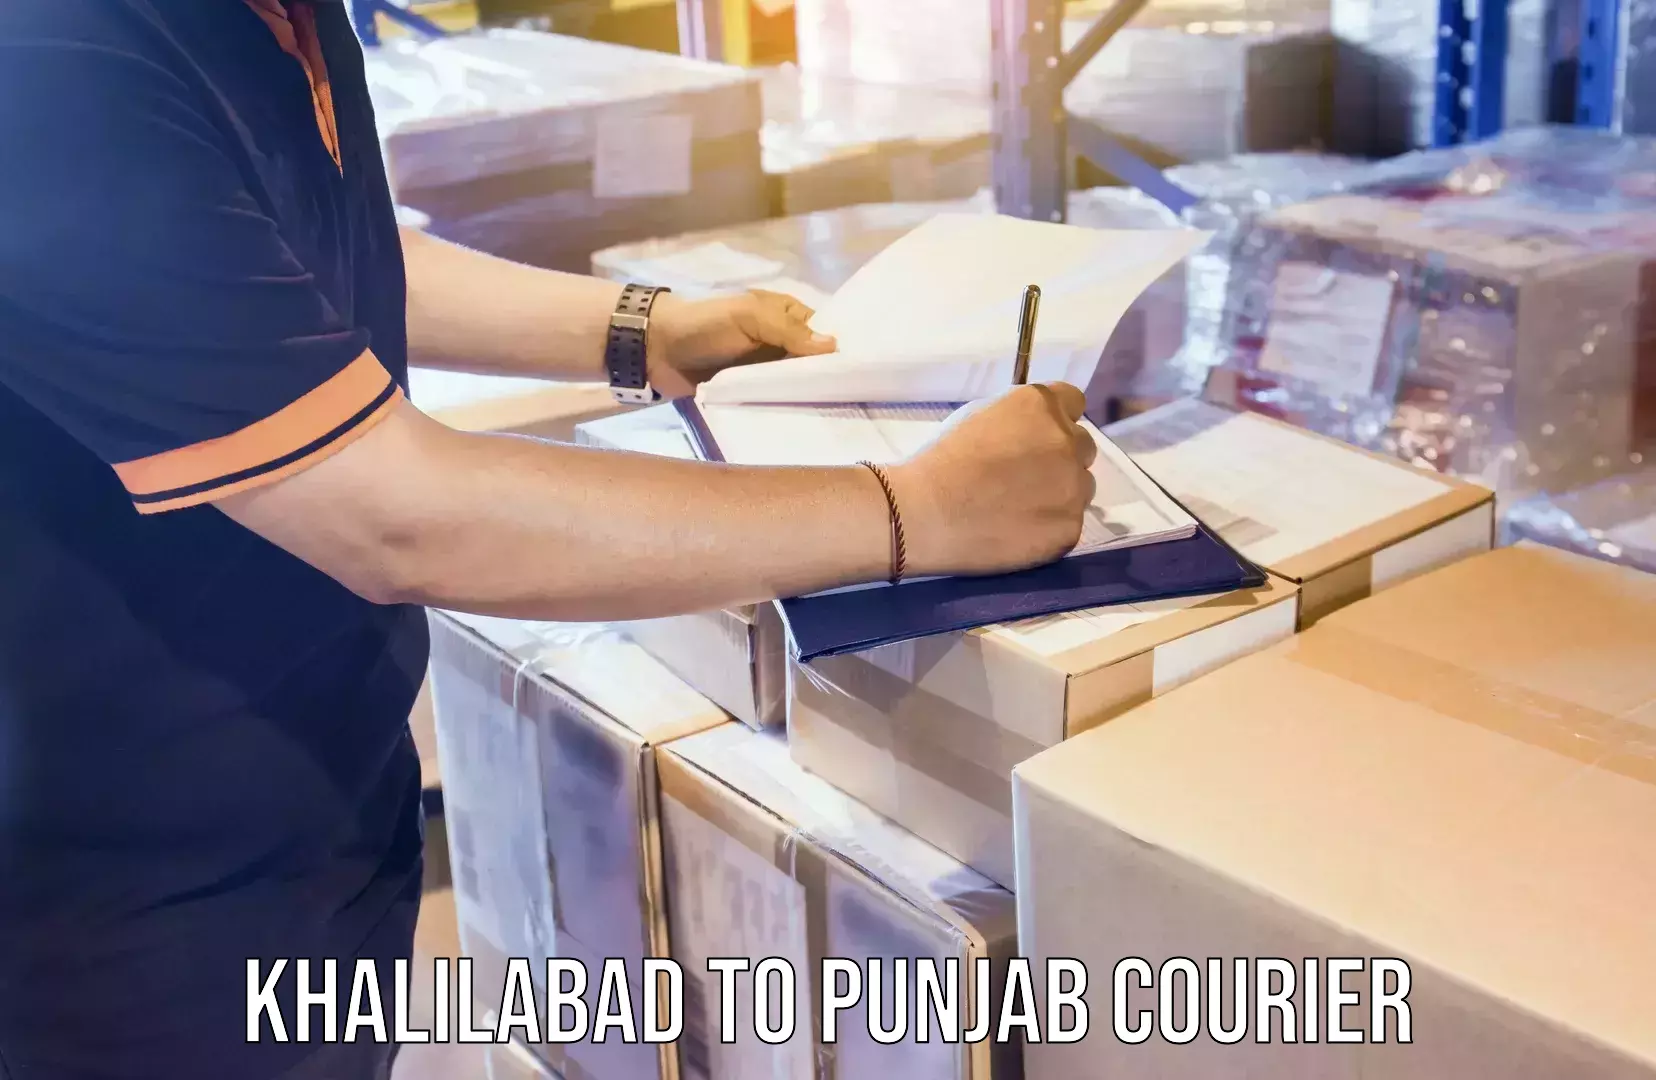 Home relocation experts Khalilabad to Punjab